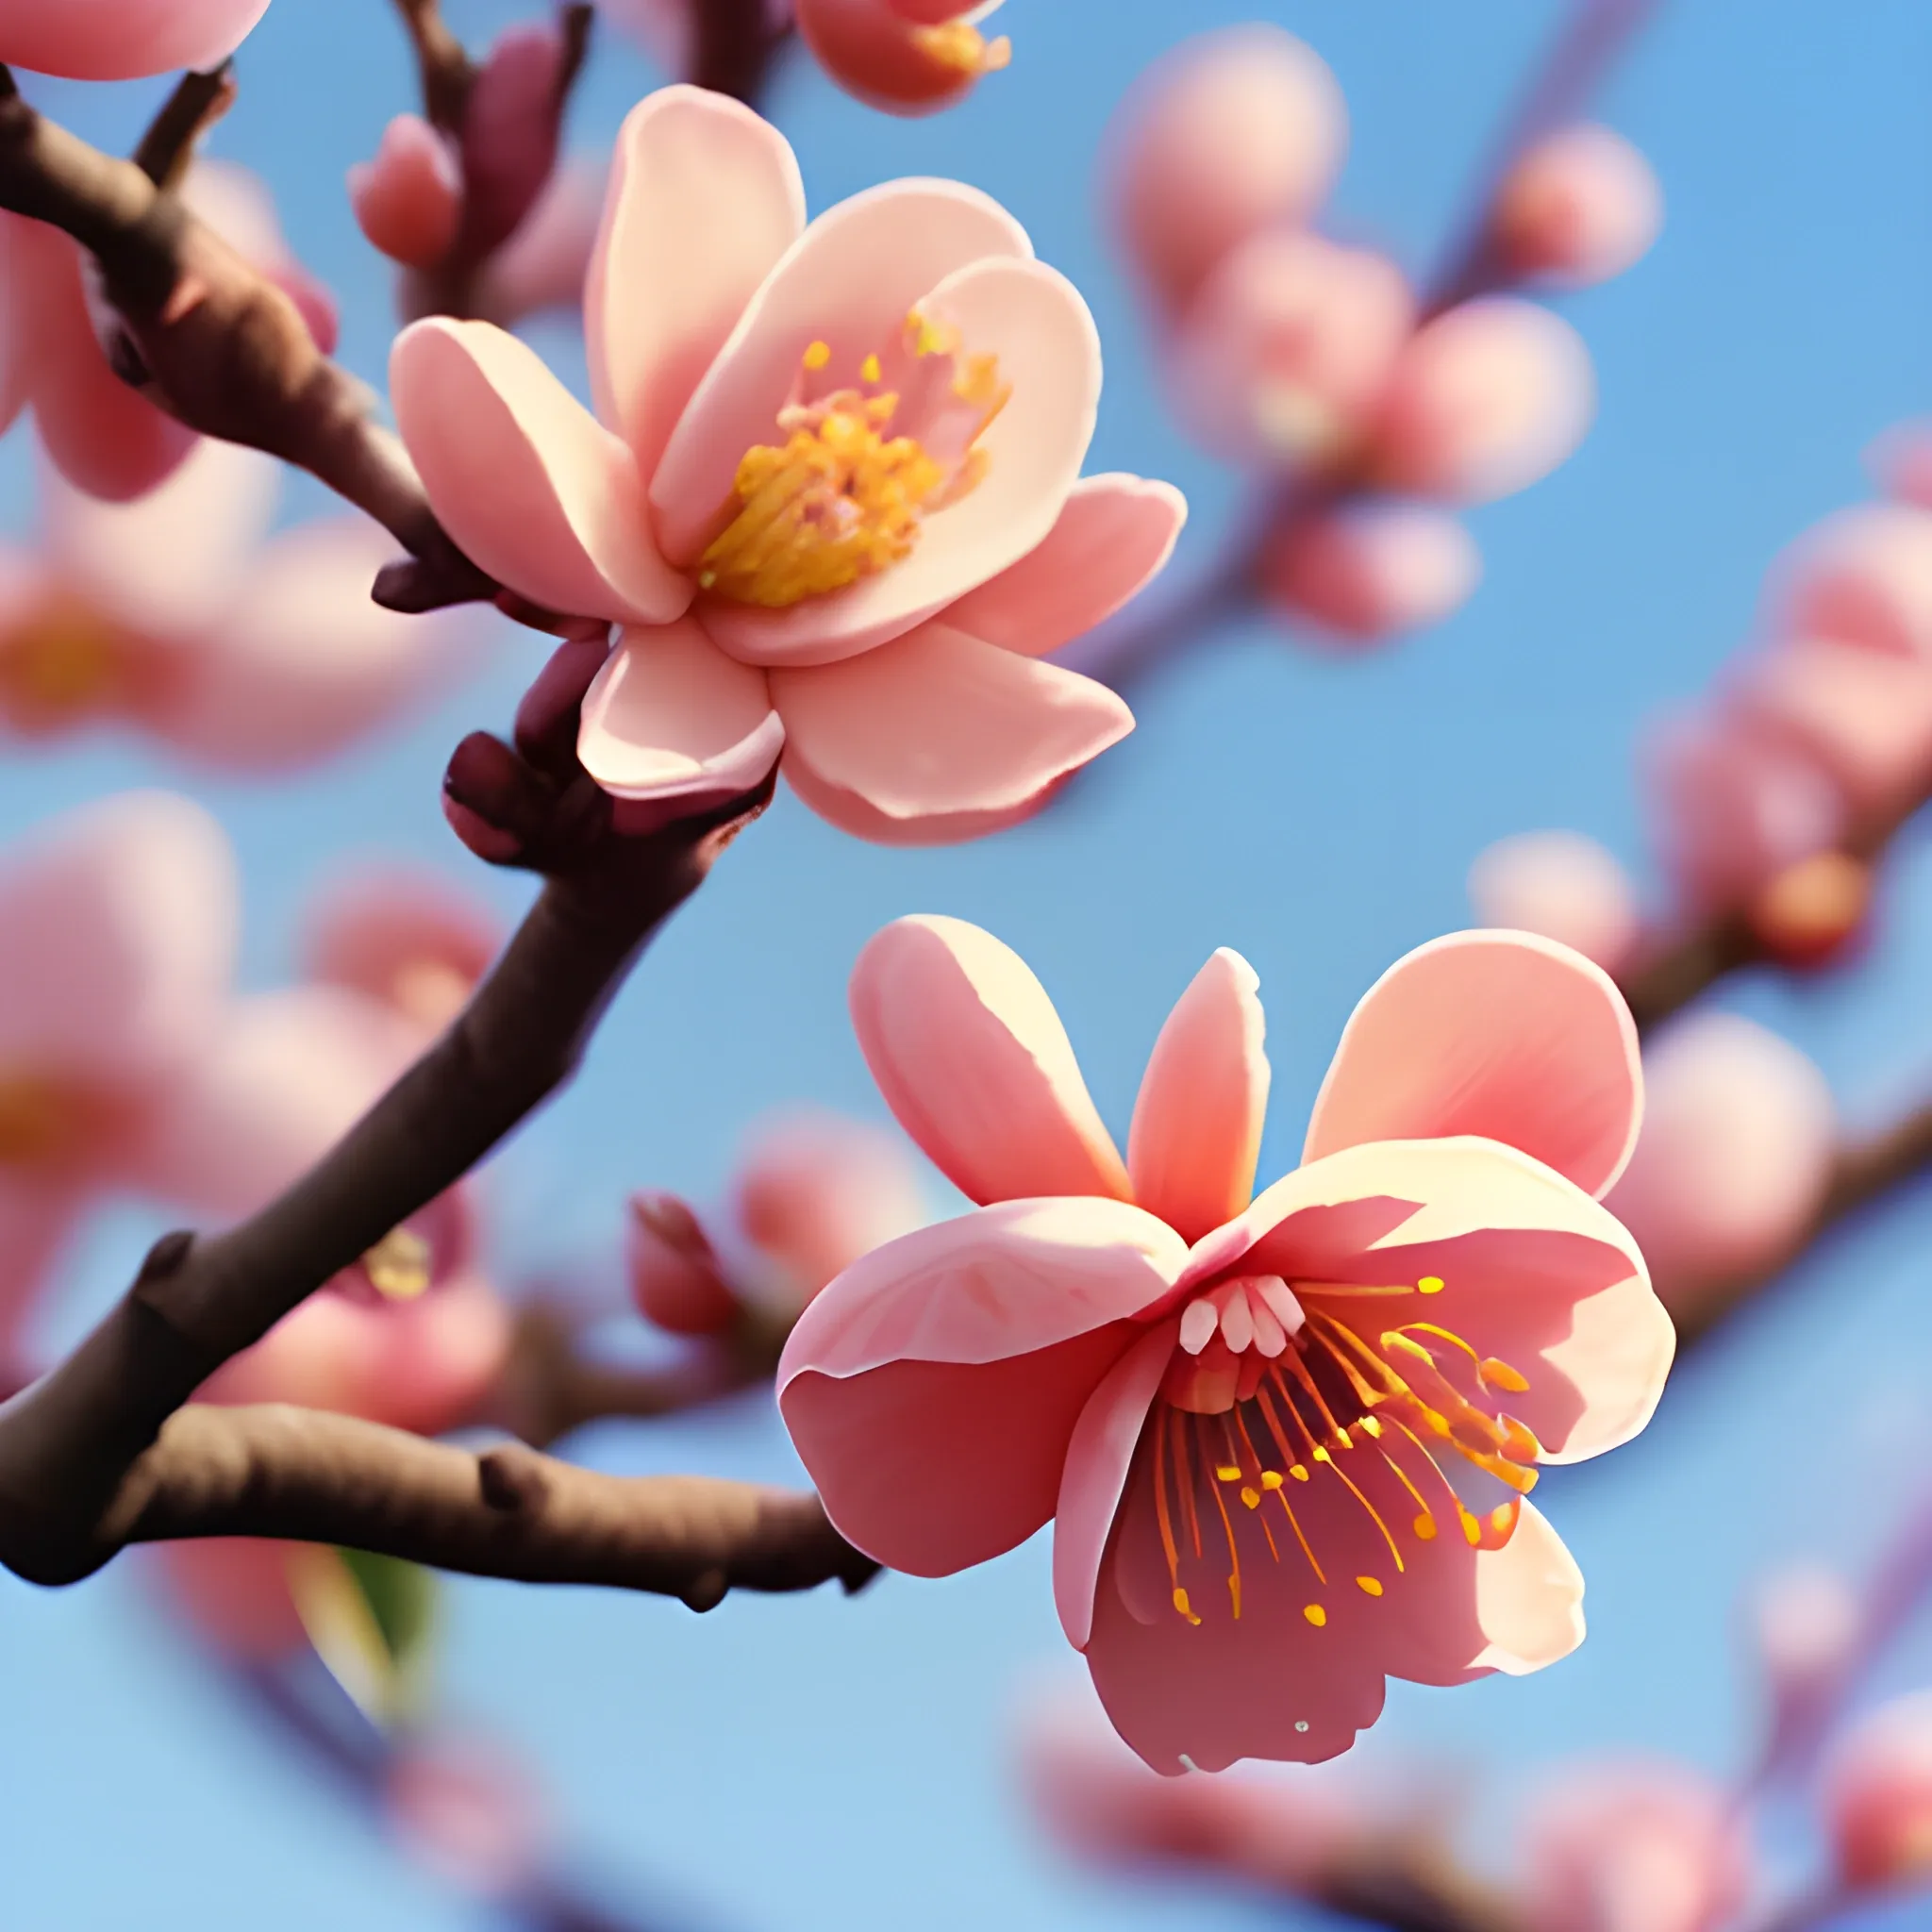 plasticine, peach blossom orchard, close up of one beautiful peach blossom tree in full bloom, early spring, cinematic